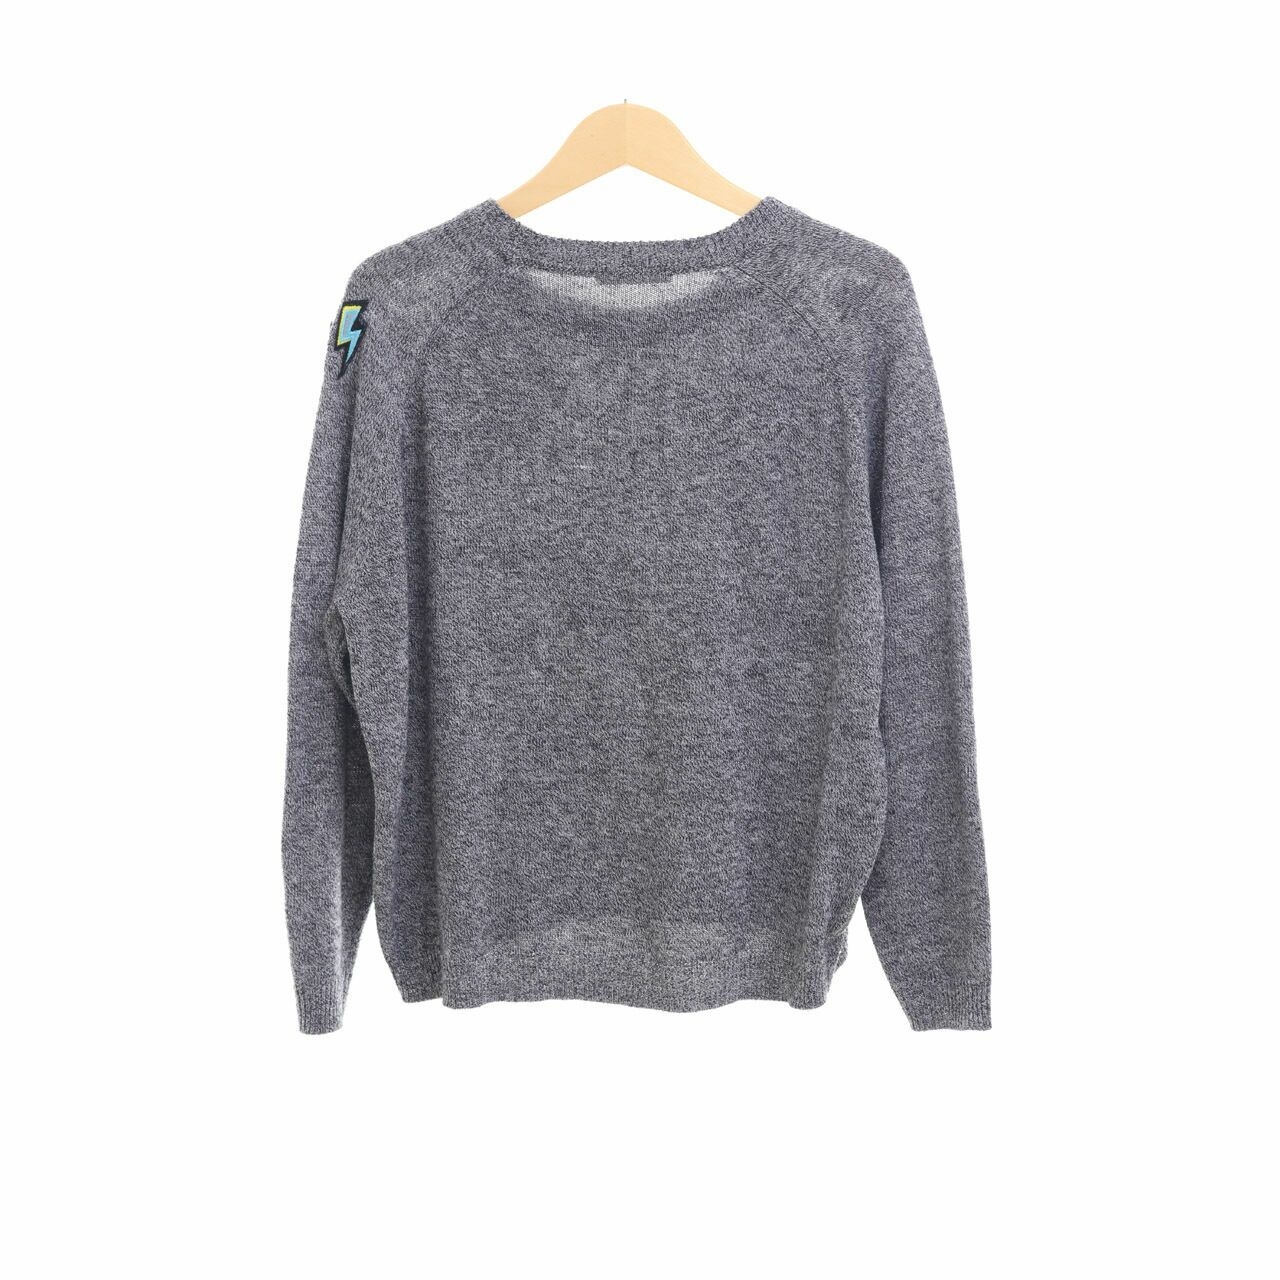 Pull & Bear Grey Knit Patch Sweater